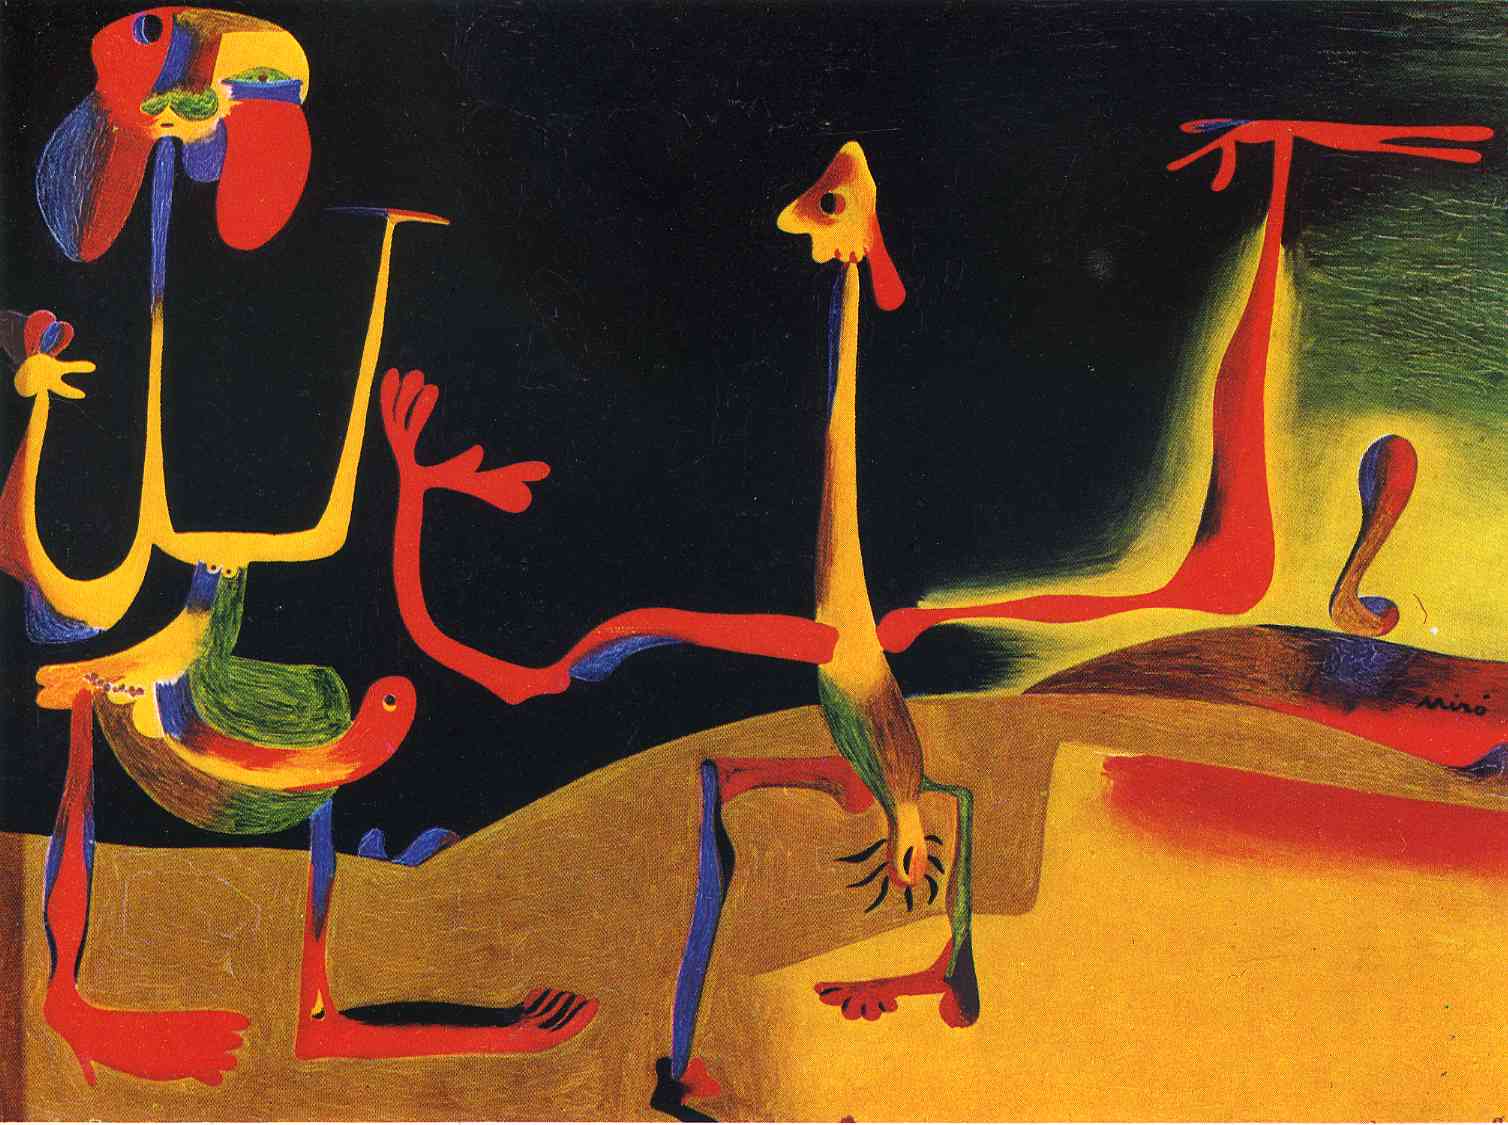 Man and Woman in Front of a Pile of Excrement by Joan Miro- Joan